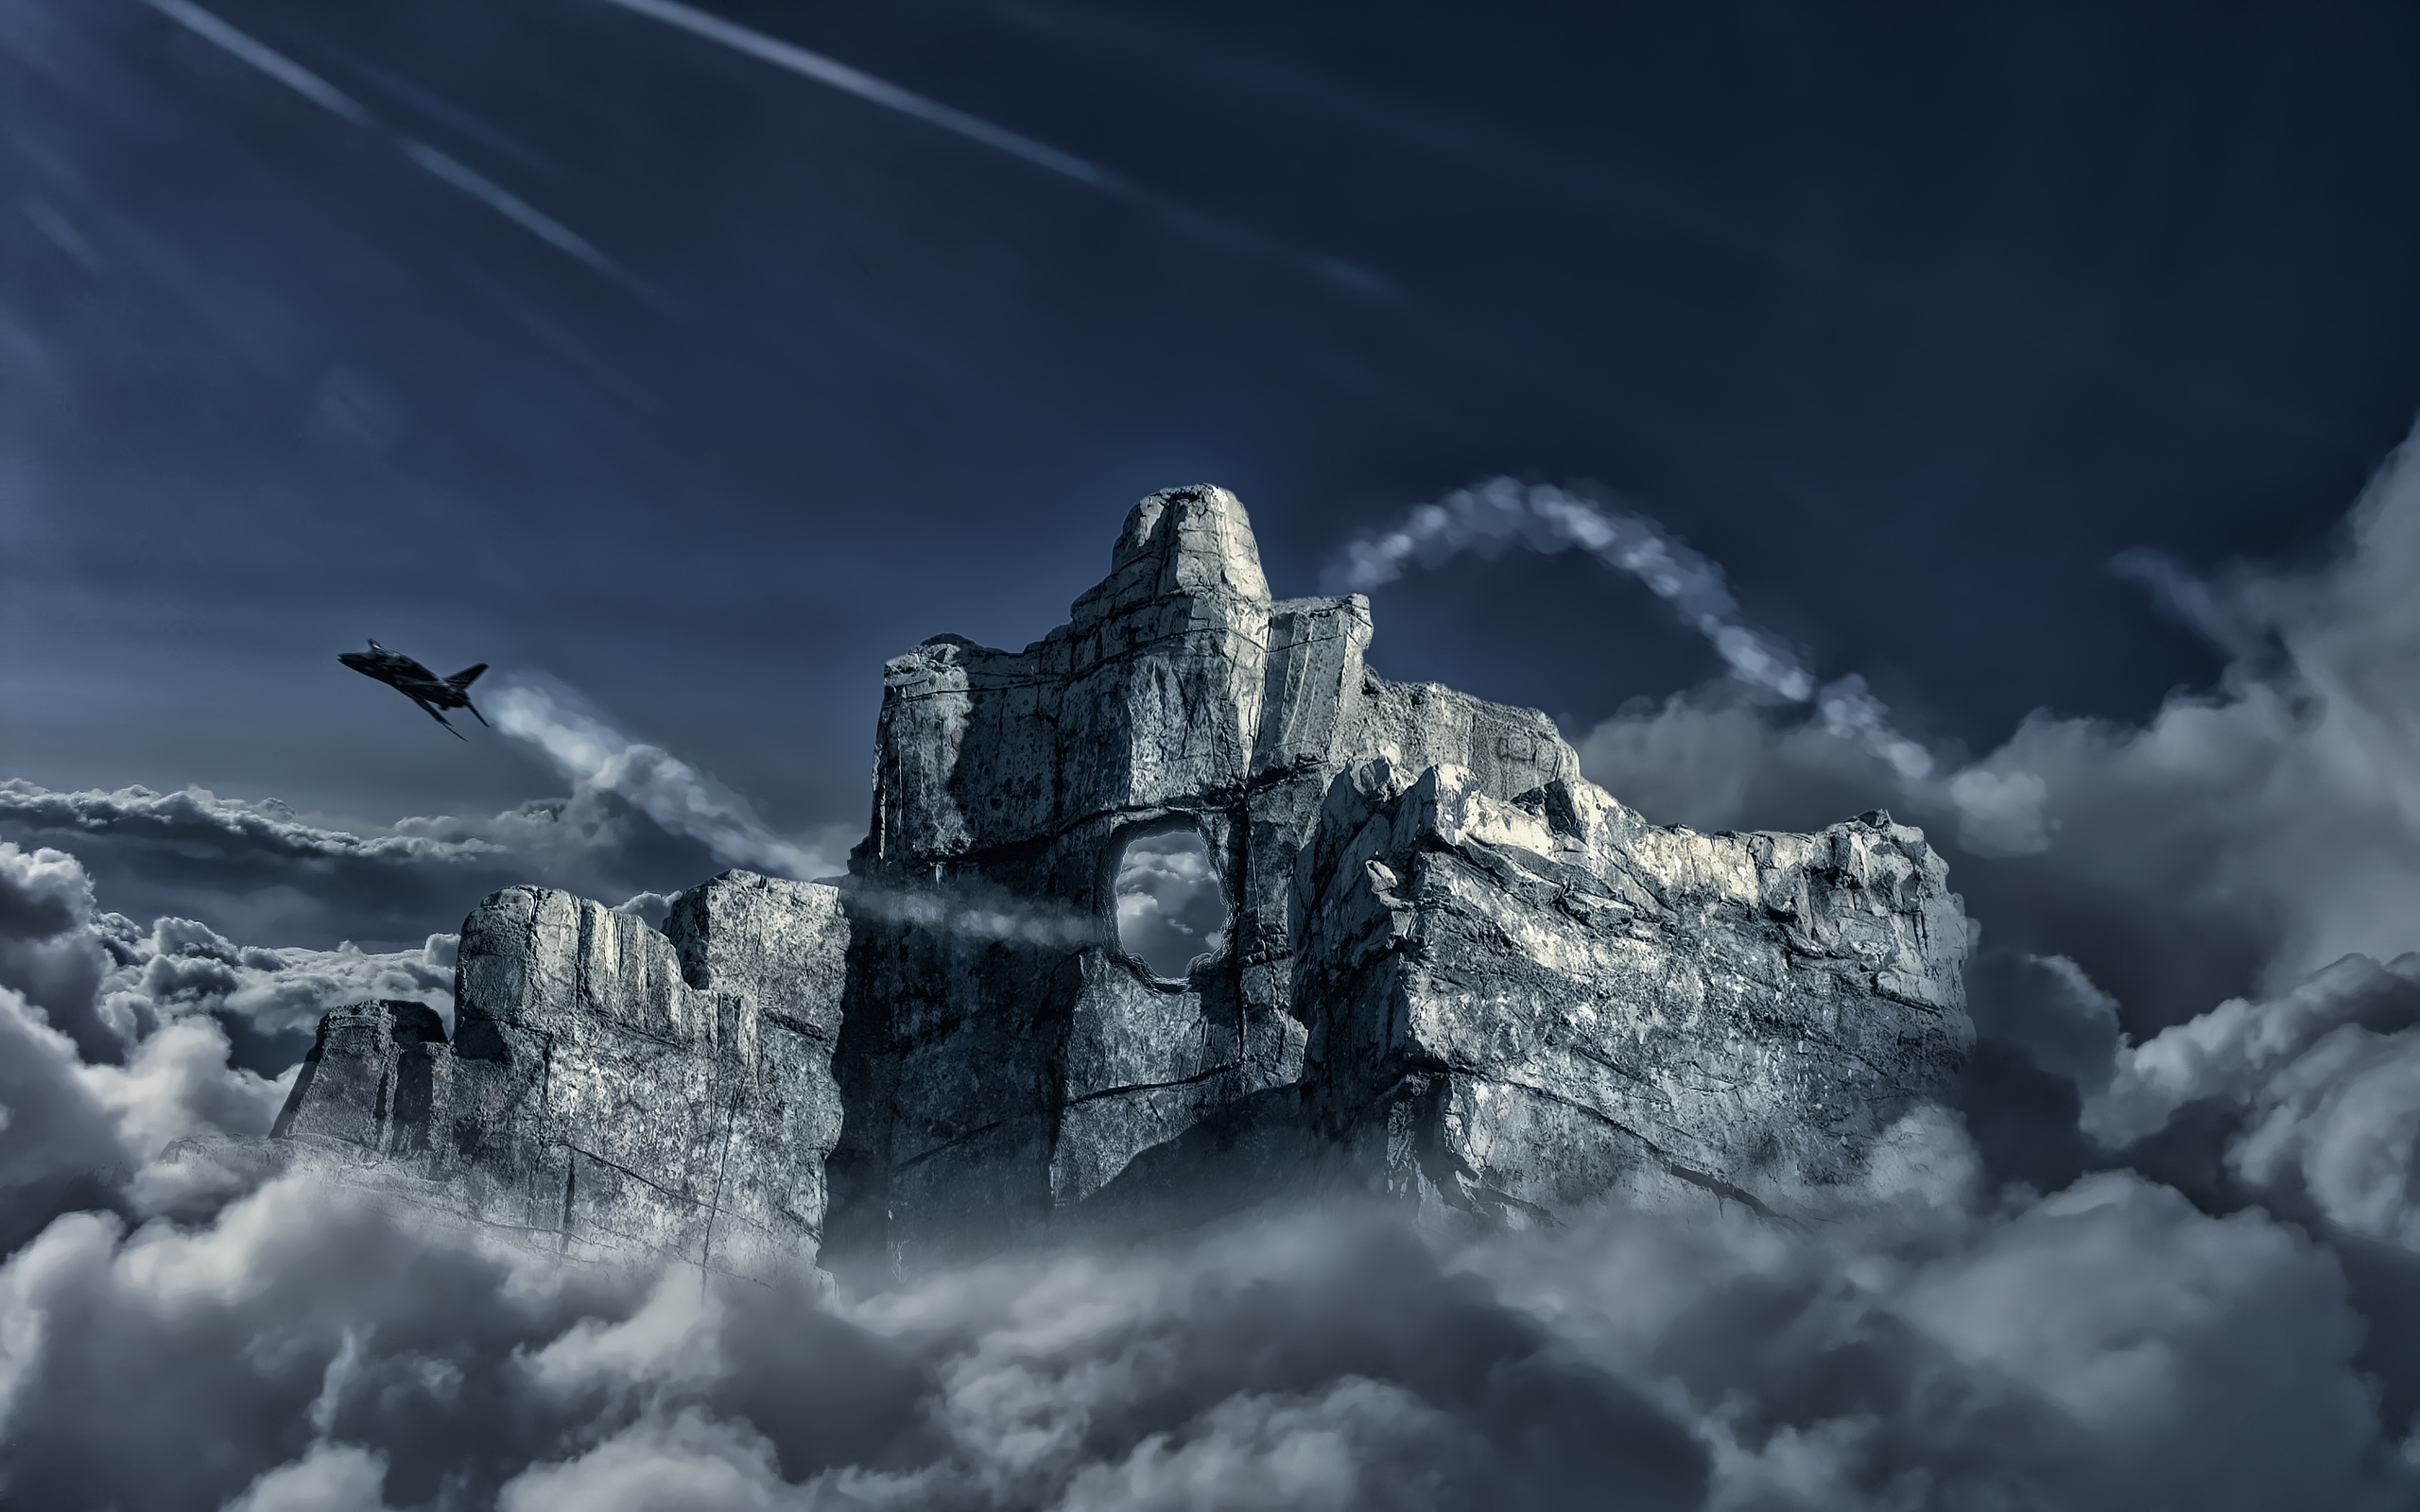 art, Airplane, Fighter, Rock, Hill, Hole, Opening, Flying, Clouds, Mountains, Jet, Jets, Military Wallpaper